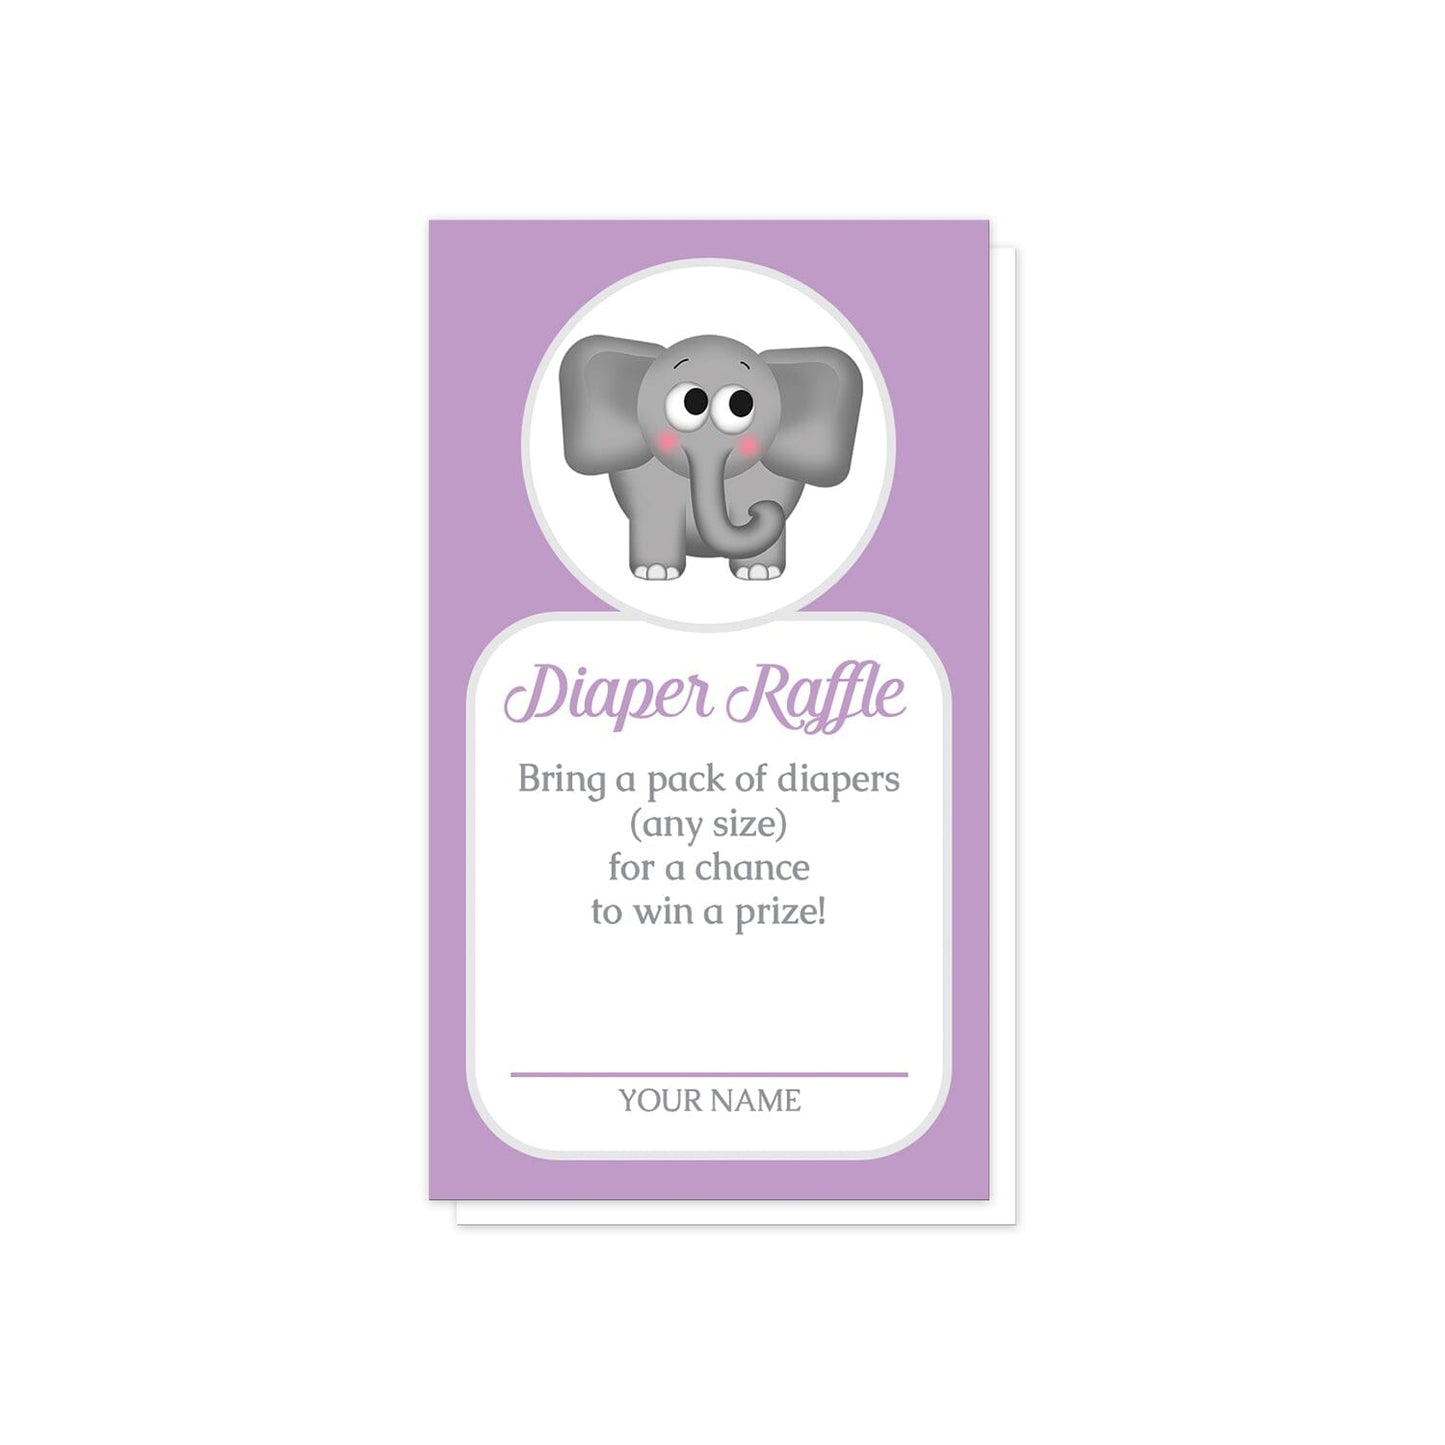 Cute Elephant Purple Diaper Raffle Cards at Artistically Invited. Cute elephant purple diaper raffle cards illustrated with an affectionate and adorable gray elephant in a white circle over a purple background color. Your diaper raffle details are printed in purple and gray in a white rectangular area below the cute little elephant.